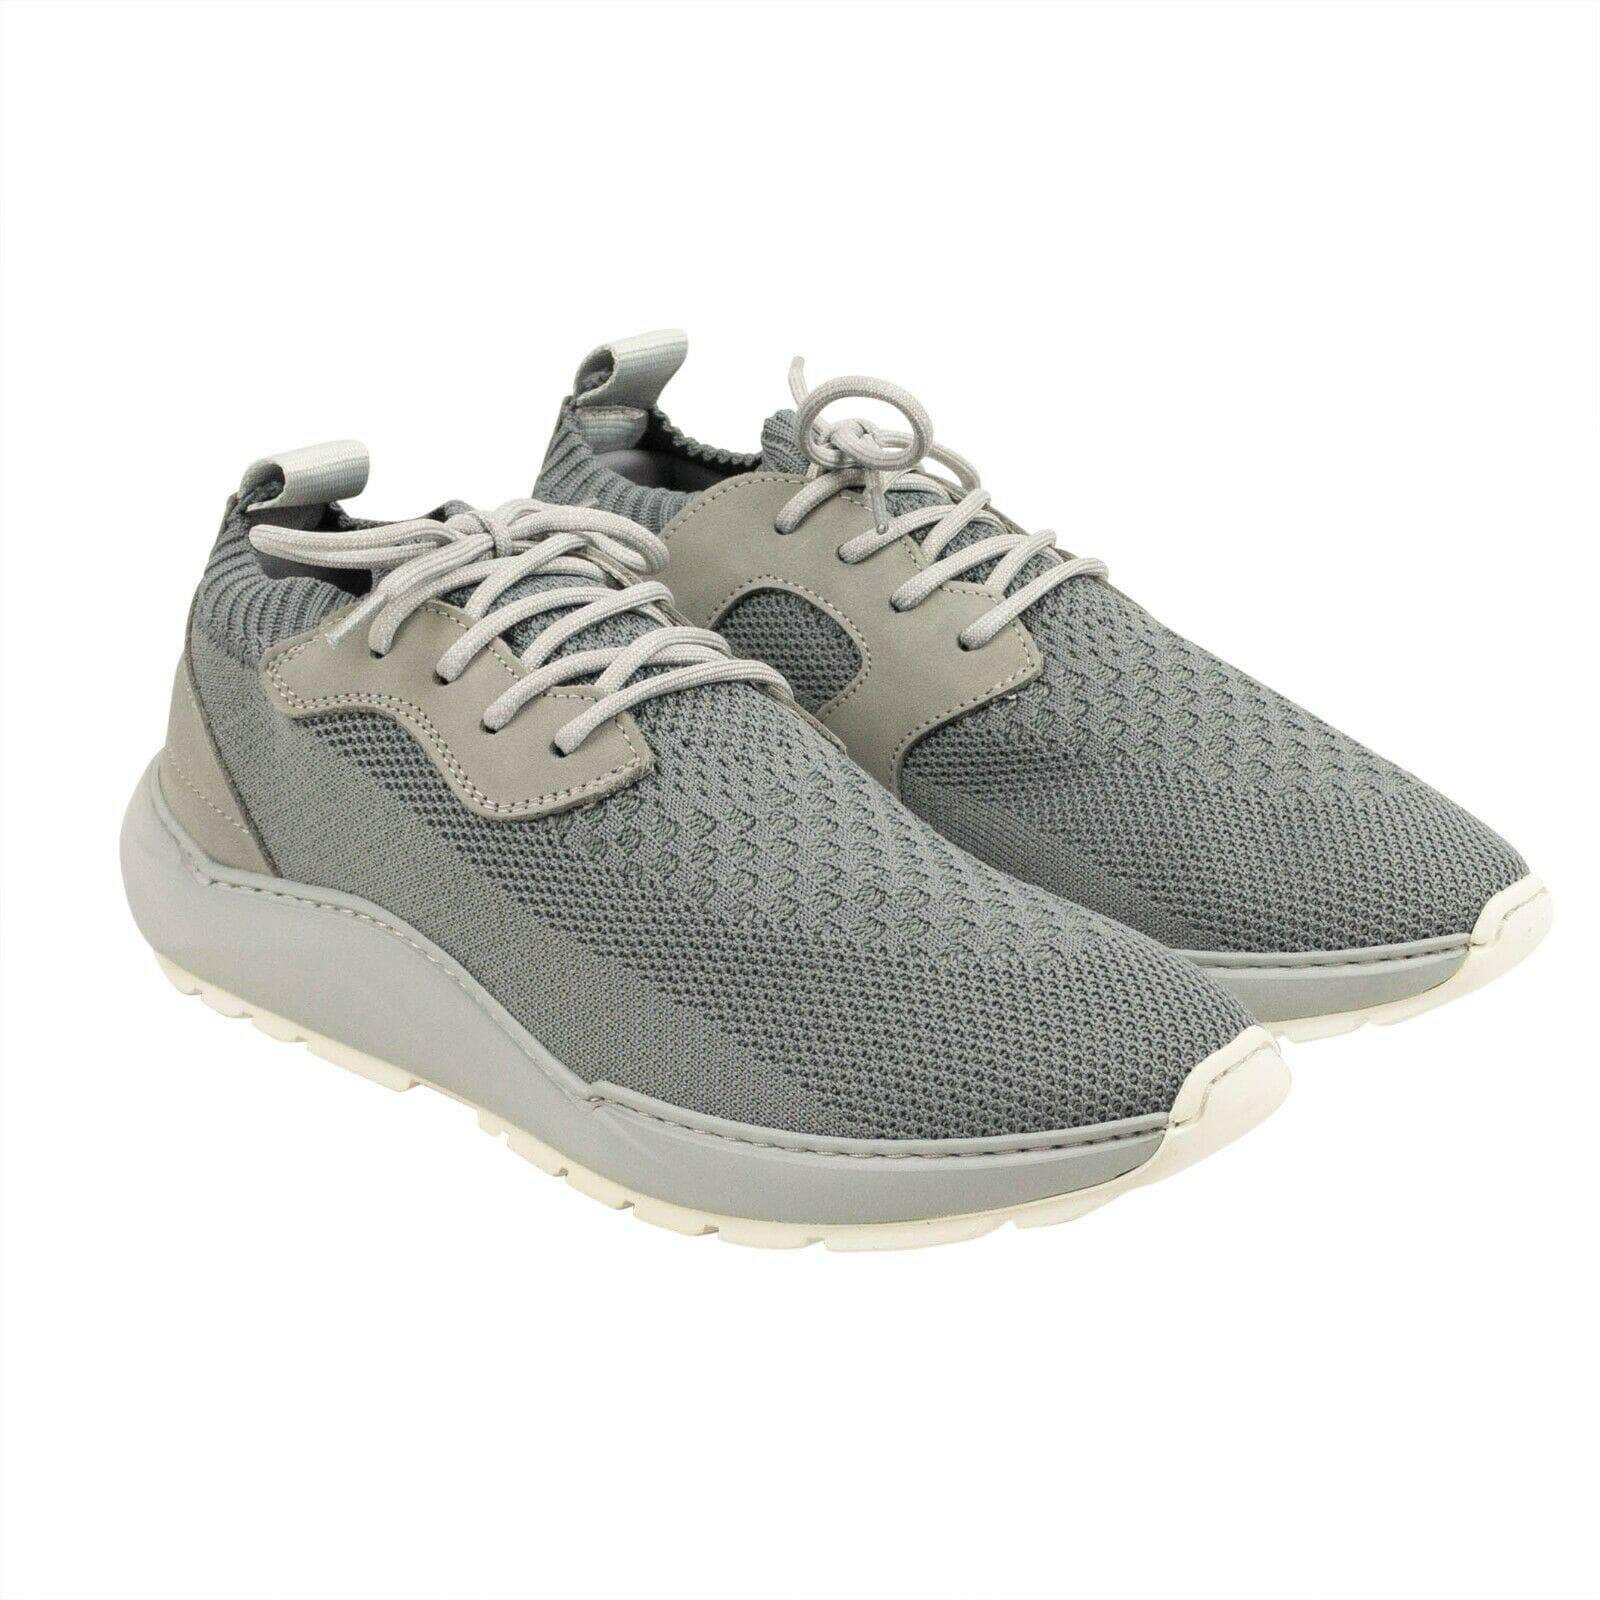 Filling Pieces channelenable-all, chicmi, couponcollection, filling-pieces, gender-mens, main-shoes, mens-shoes, size-40, size-41, size-42, size-43, size-44, under-250 Grey Knit Speed Arch Runner Sneakers